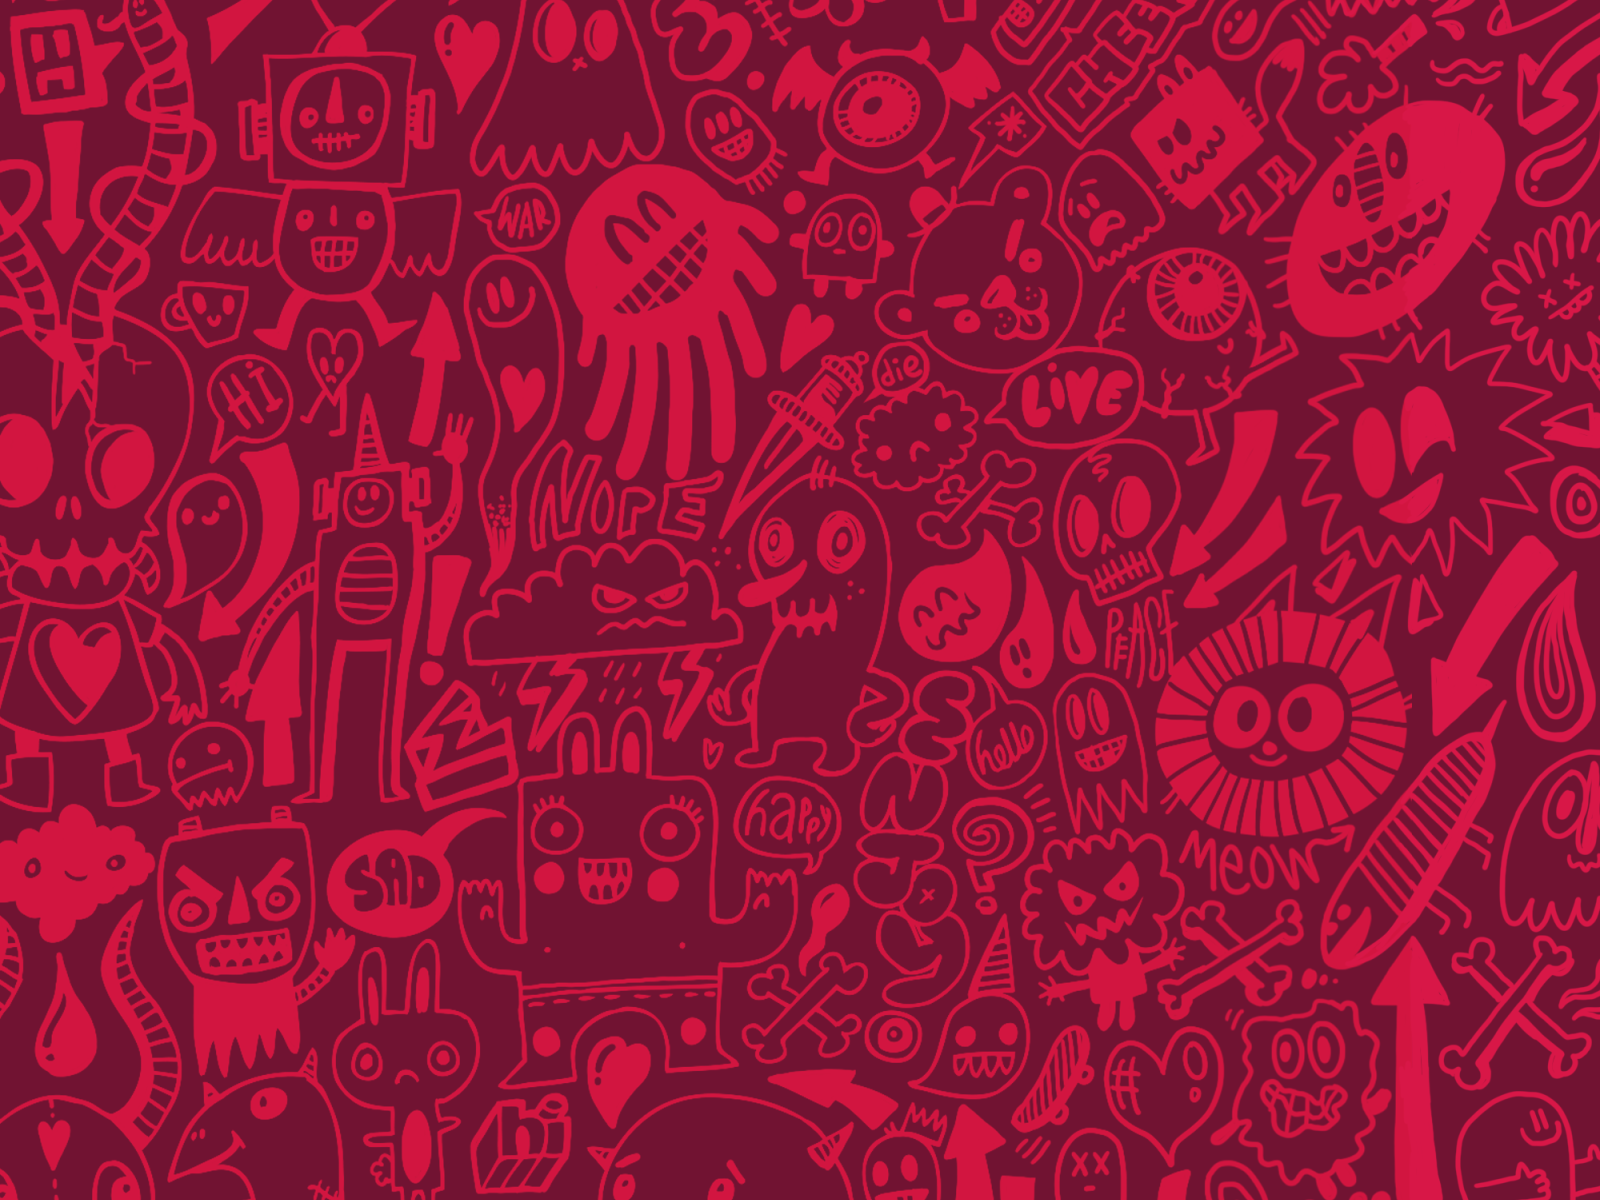 Doodle Pattern Number 5 by wotto76 on Dribbble